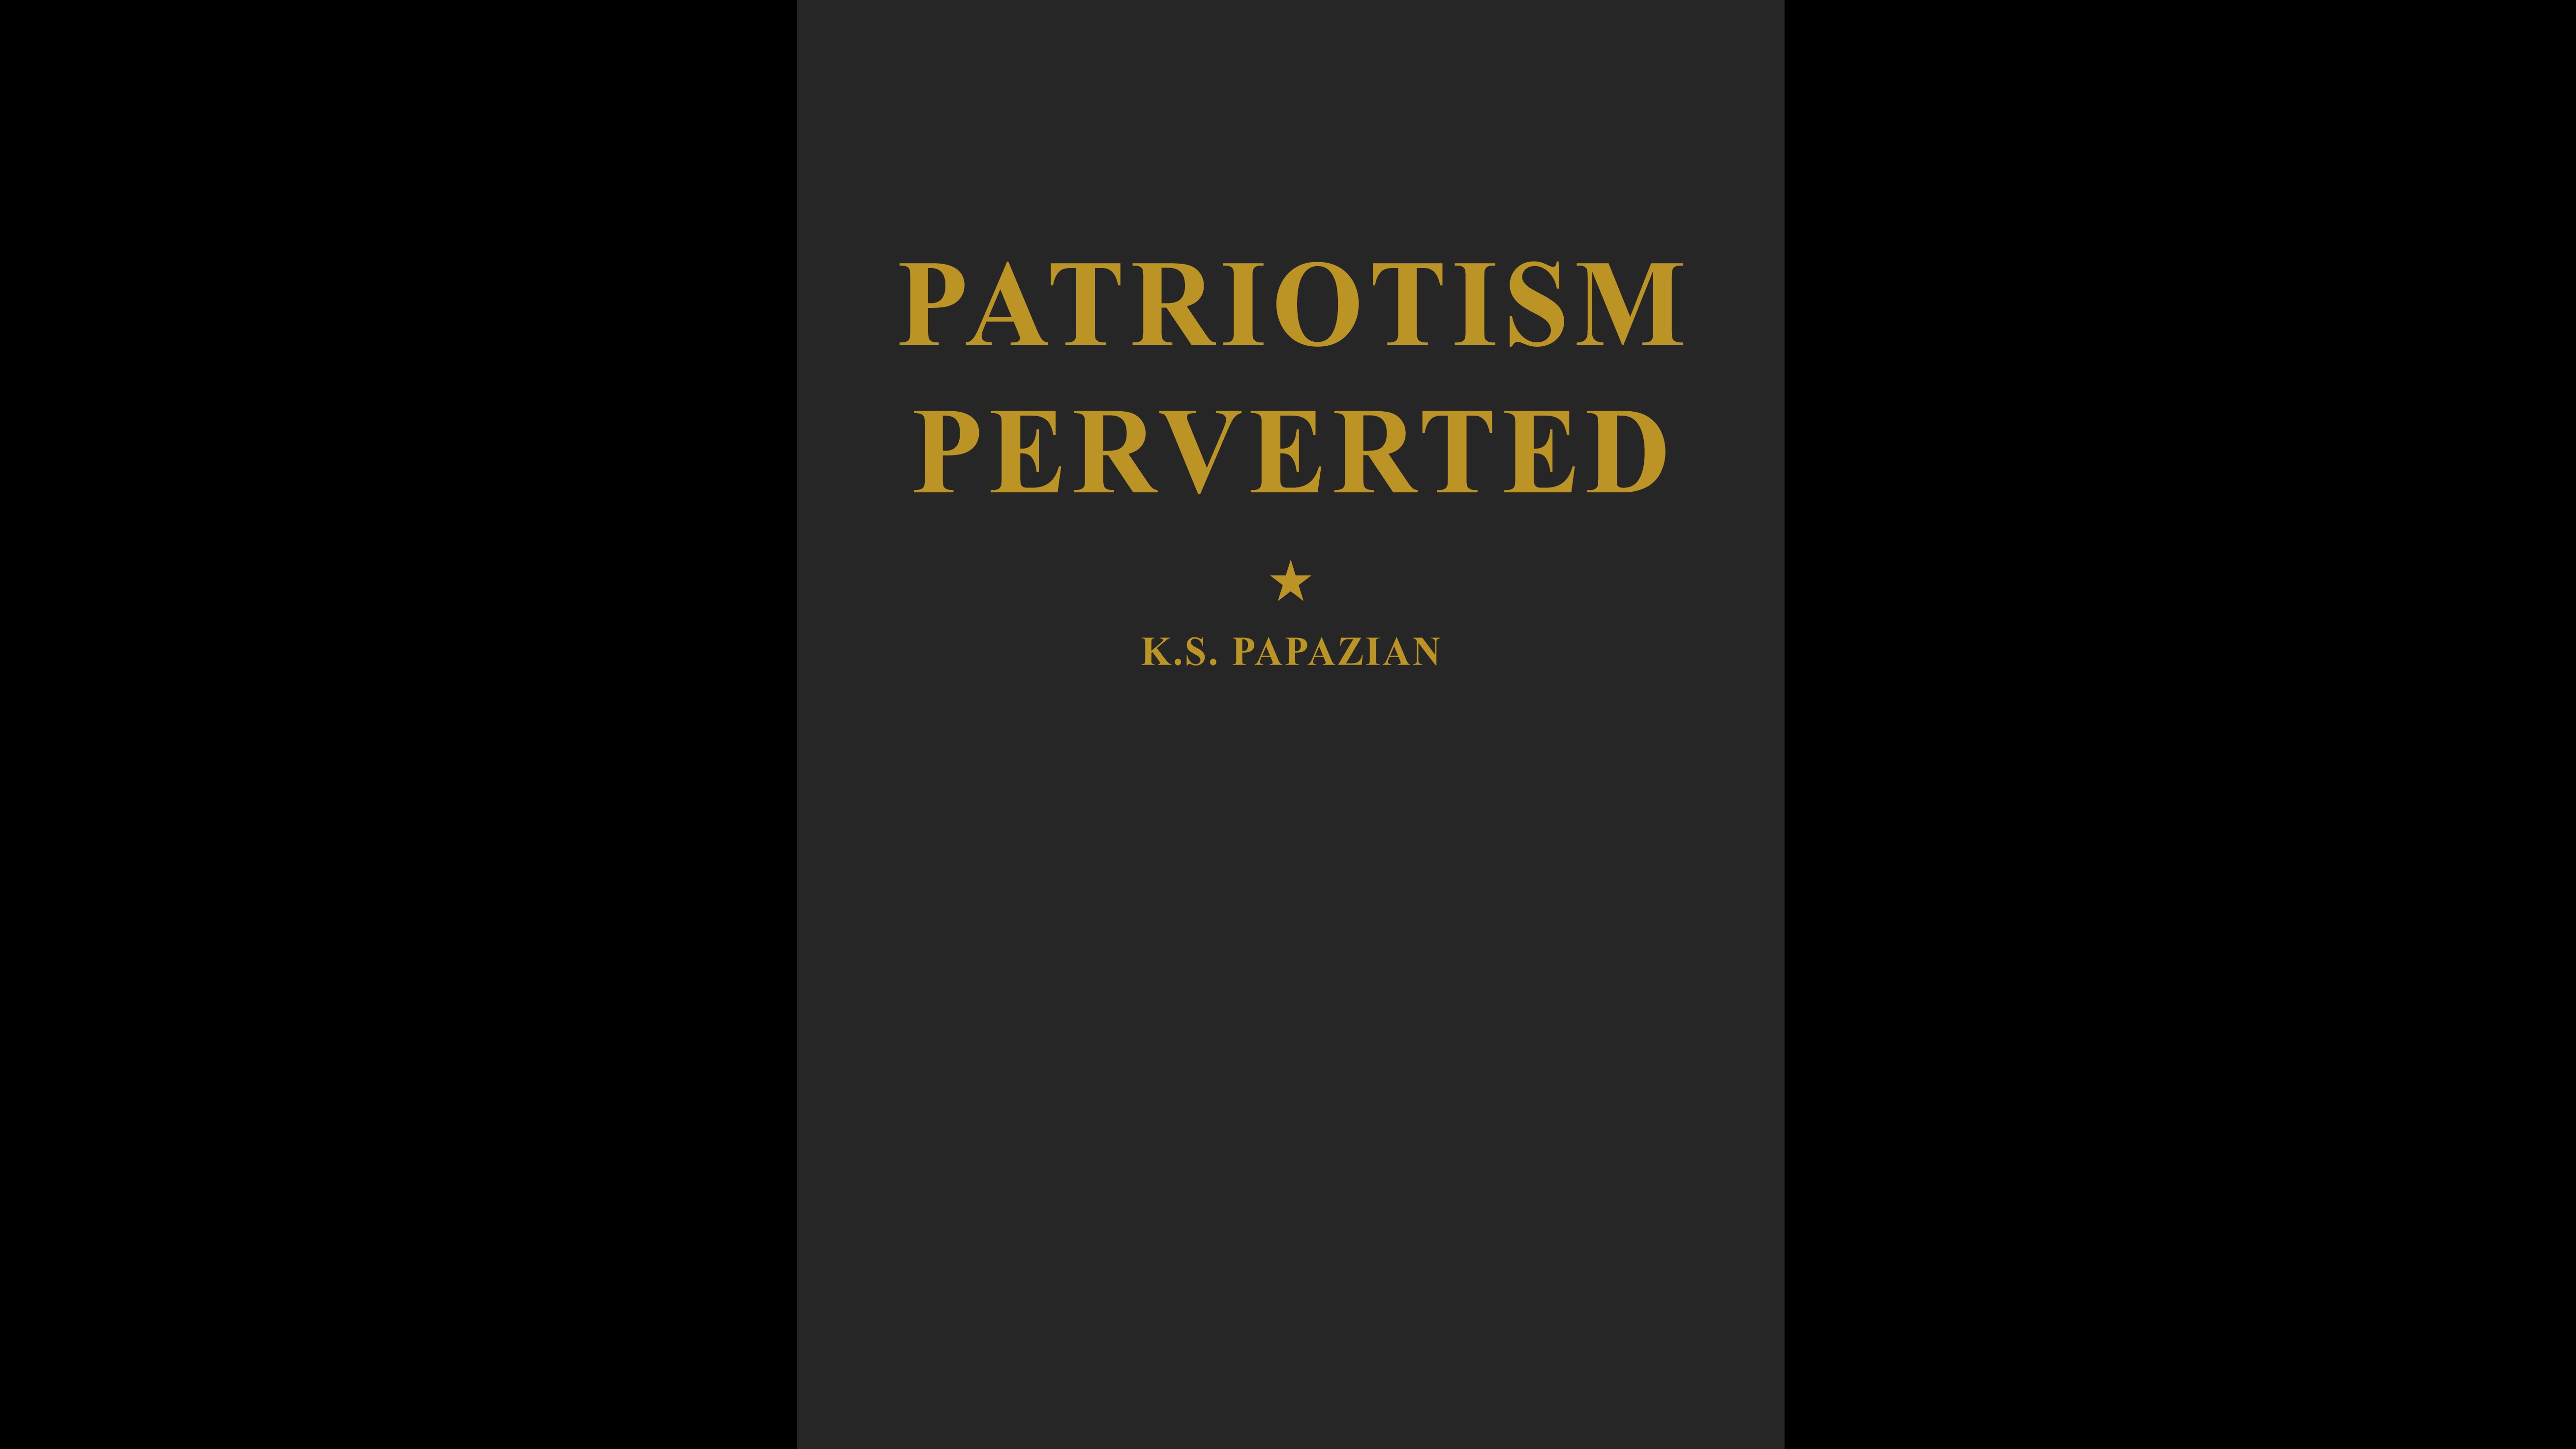 ANNOUNCEMENT: THE BOOK TITLED “PATRIOTISM PERVERTED” REPRINTED